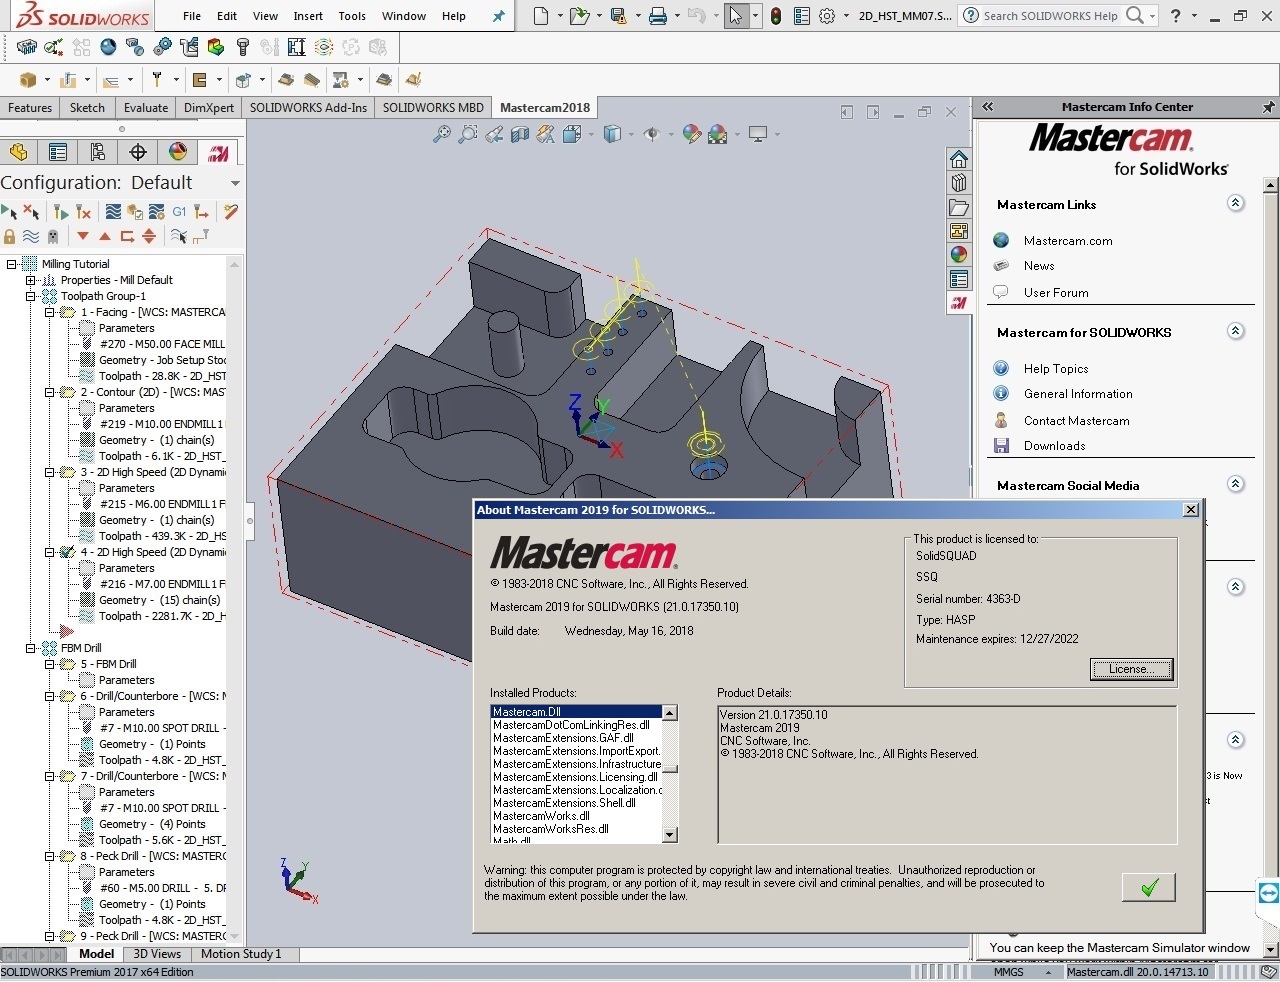 Working with Mastercam 2019 (v21.0.17350.10) for SolidWorks full